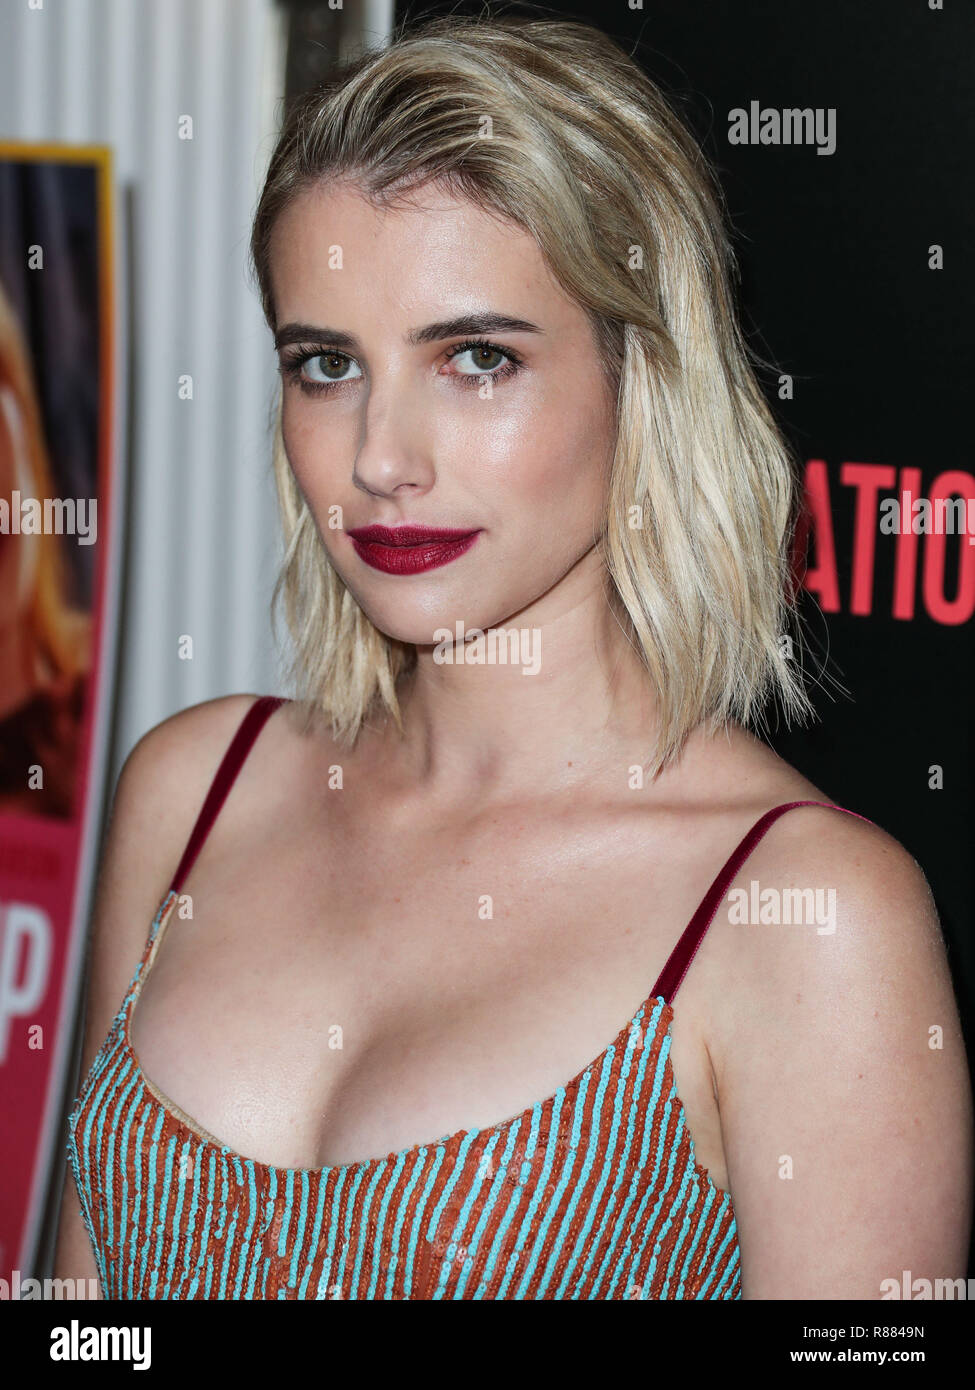 WEST HOLLYWOOD, LOS ANGELES, CA, USA - OCTOBER 30: Actress Emma Roberts wearing a Markarian dress, Christian Louboutin heels, and Irene Neuwirth jewelry arrives at the Los Angeles Premiere Of Vertical Entertainment's 'In A Relationship' held at The London West Hollywood Screening Room on October 30, 2018 in West Hollywood, Los Angeles, California, United States. (Photo by Xavier Collin/Image Press Agency) Stock Photo